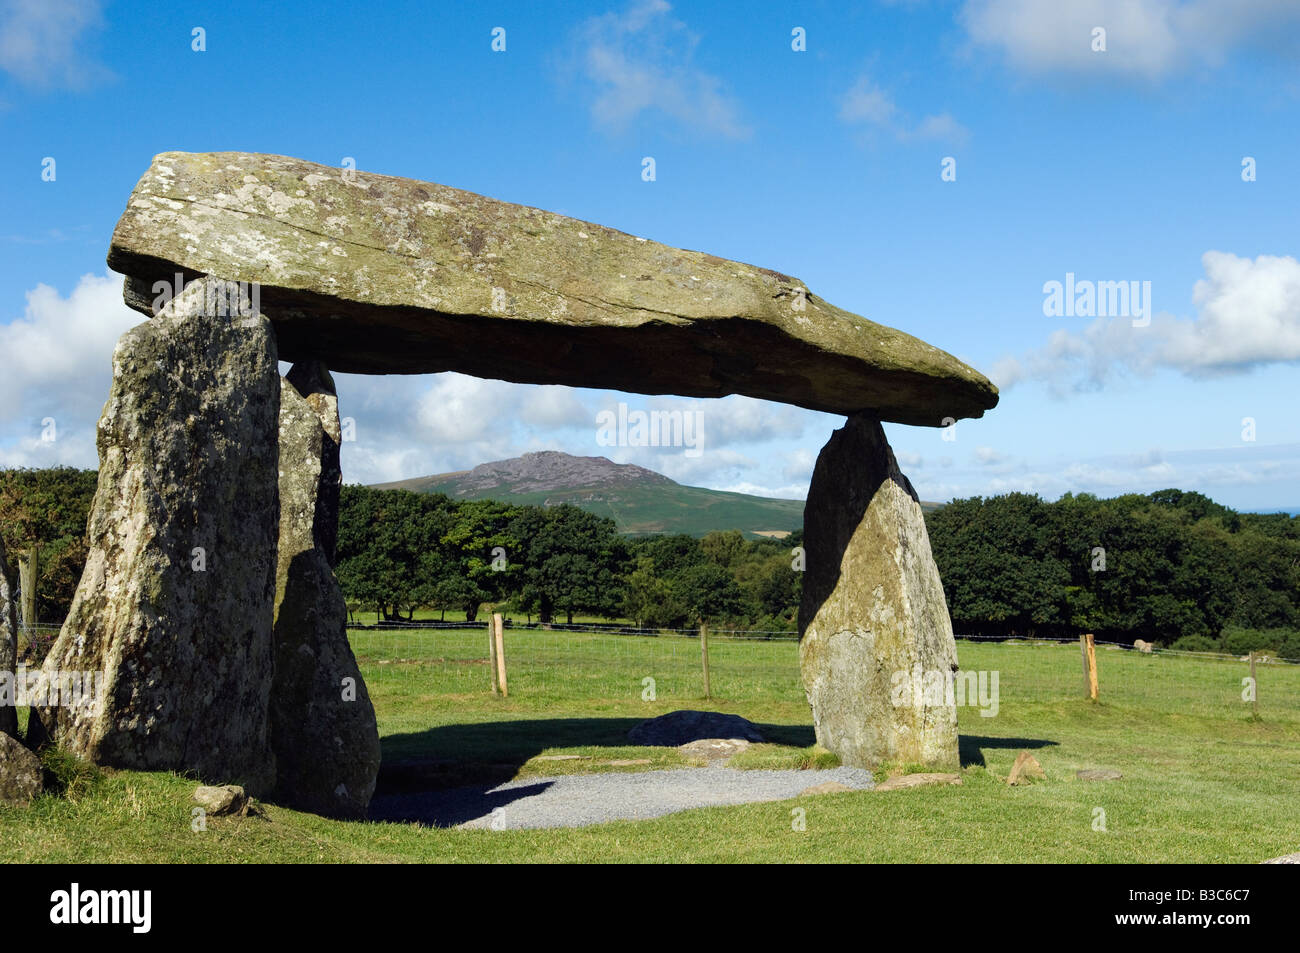 UK, Wales, Pembrokeshire. The site of the ancient neolithic dolmen at Pentre Ifan, Wales's most famous megalith, the remains of Stock Photo